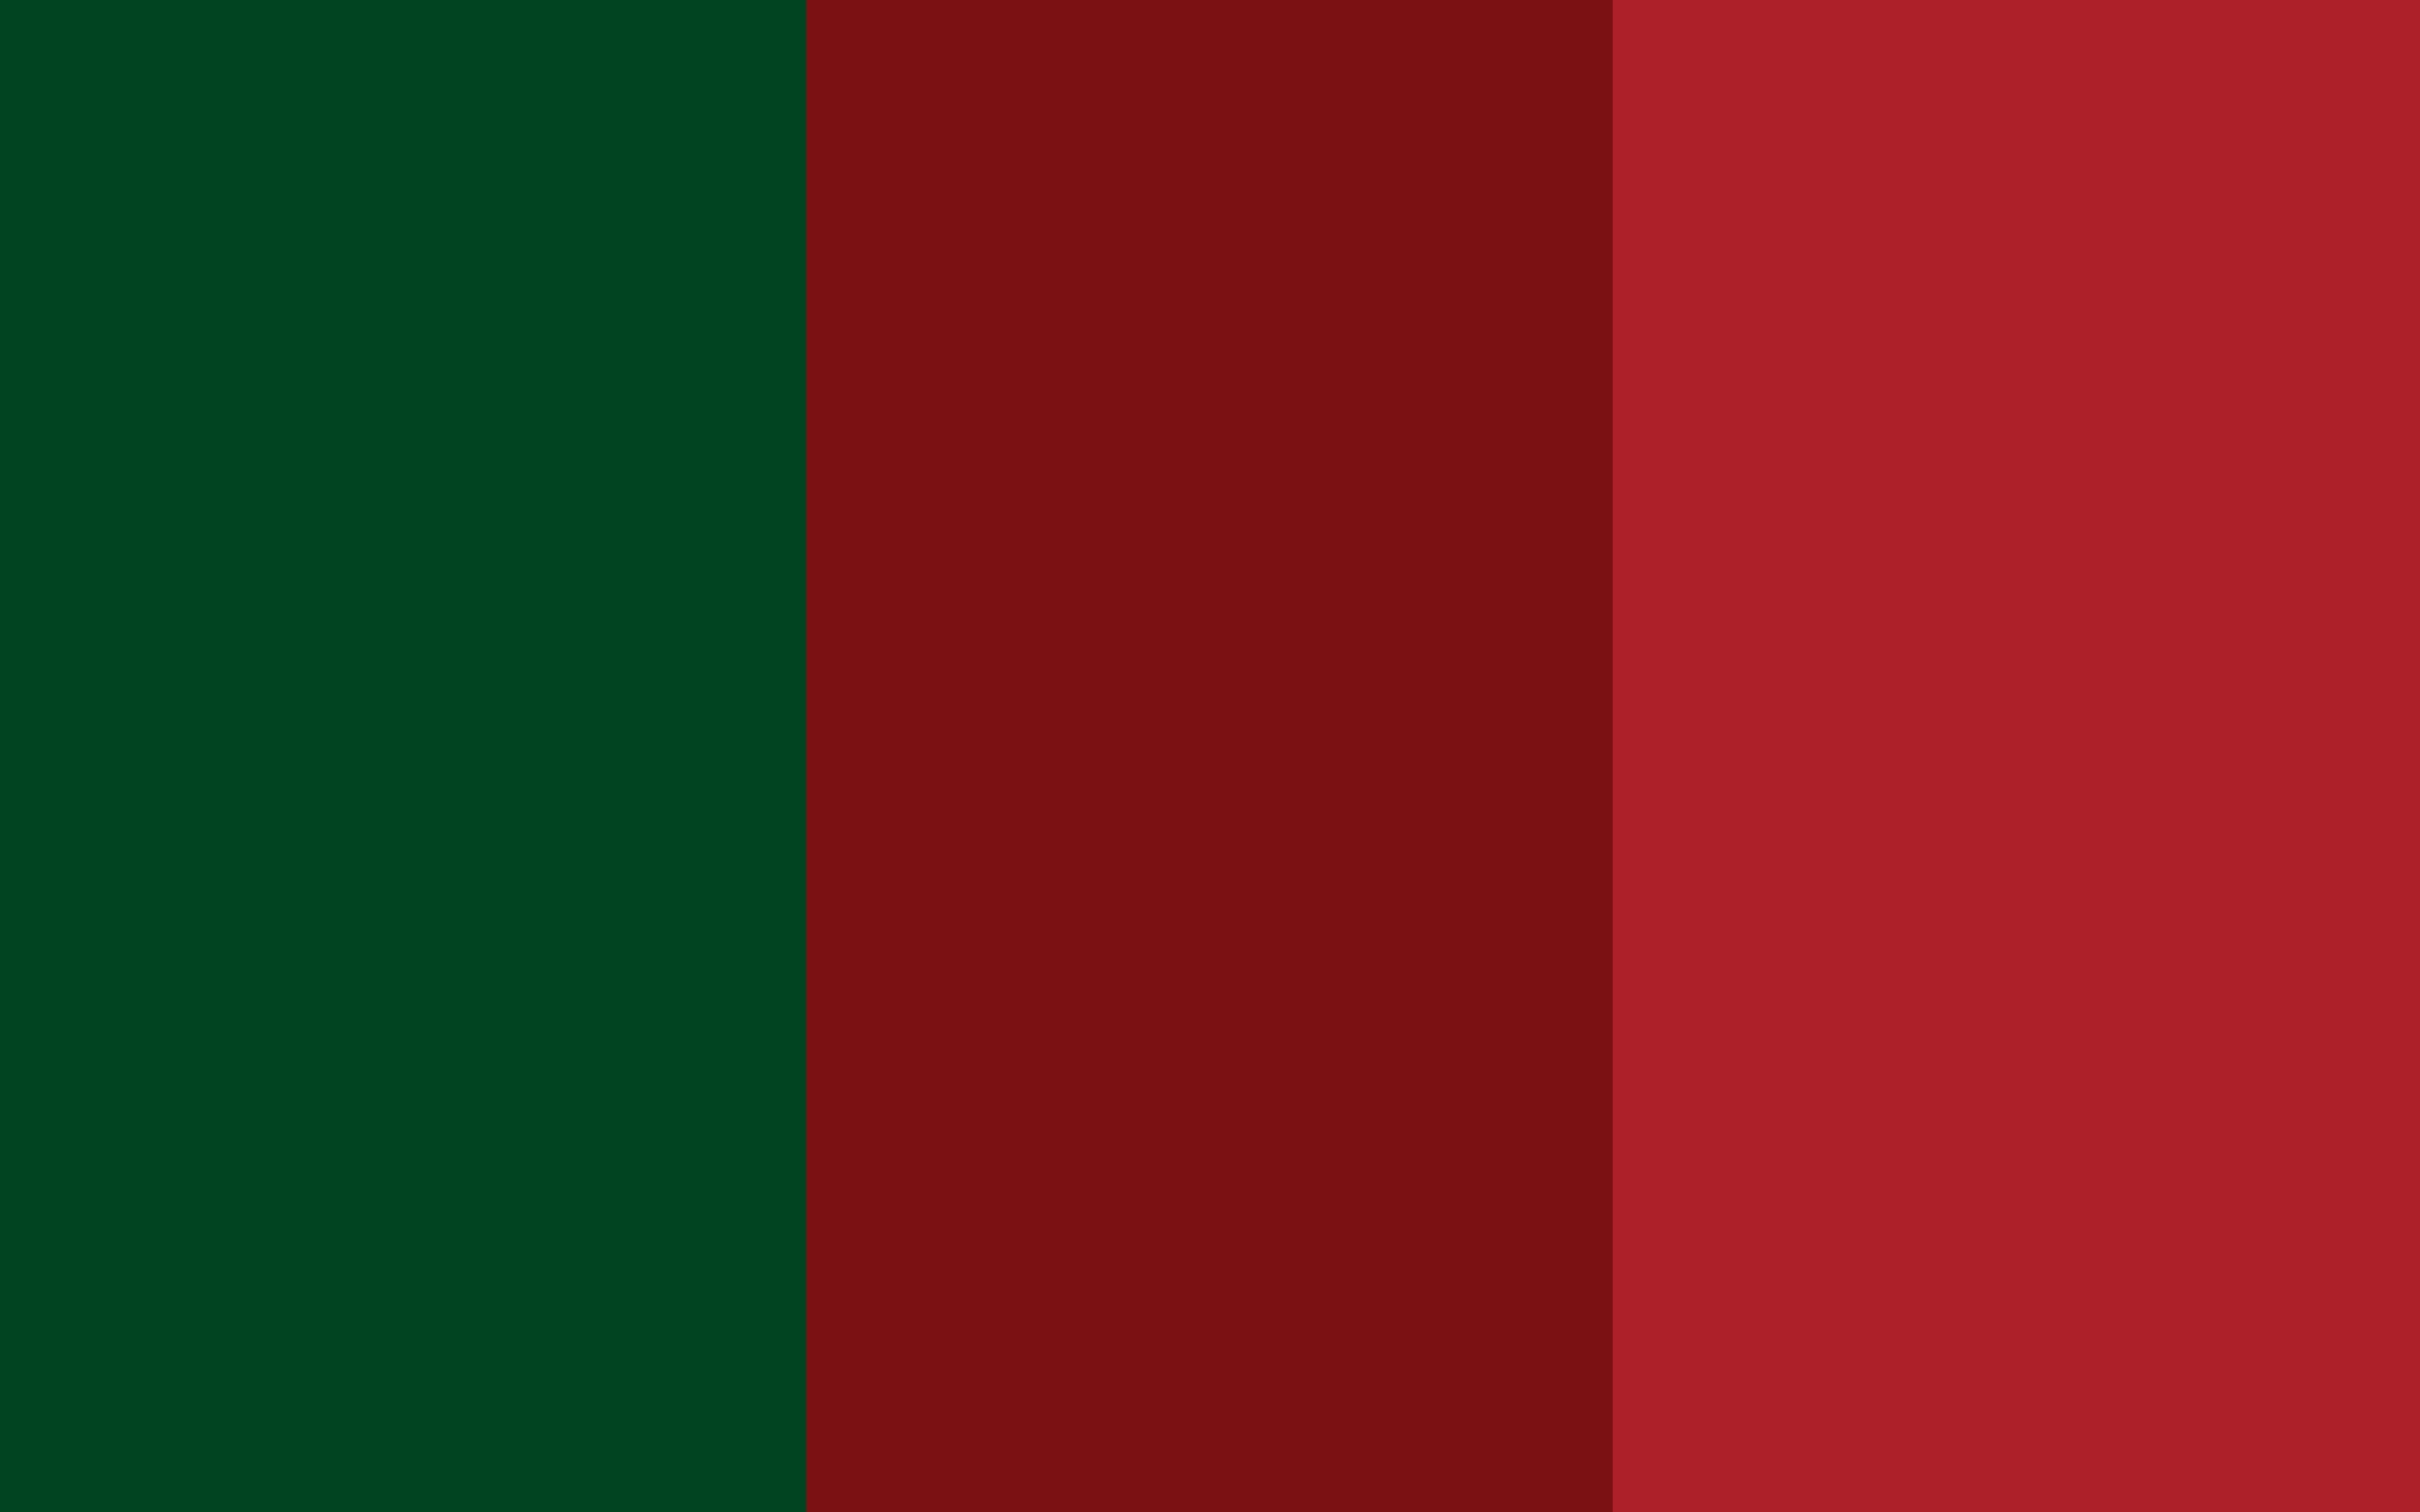 Up Forest Green Maroon And Upsdell Red Three Color Background